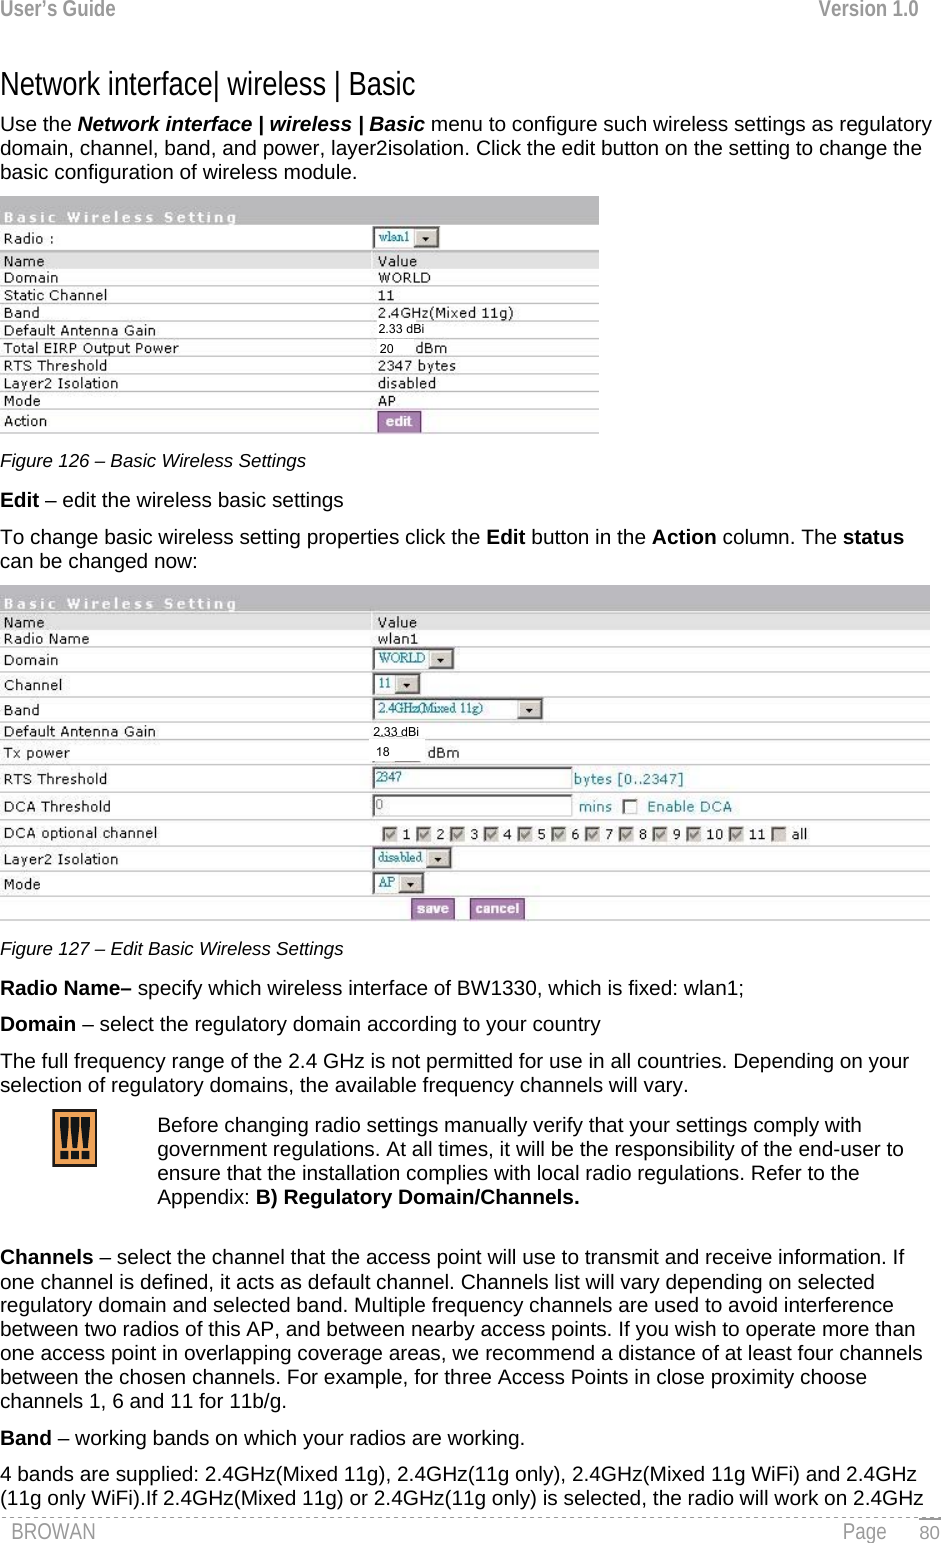 User’s Guide  Version 1.0  Network interface| wireless | Basic Use the Network interface | wireless | Basic menu to configure such wireless settings as regulatory domain, channel, band, and power, layer2isolation. Click the edit button on the setting to change the basic configuration of wireless module.  Figure 126 – Basic Wireless Settings Edit – edit the wireless basic settings To change basic wireless setting properties click the Edit button in the Action column. The status can be changed now:  Figure 127 – Edit Basic Wireless Settings Radio Name– specify which wireless interface of BW1330, which is fixed: wlan1; Domain – select the regulatory domain according to your country The full frequency range of the 2.4 GHz is not permitted for use in all countries. Depending on your selection of regulatory domains, the available frequency channels will vary. Before changing radio settings manually verify that your settings comply with government regulations. At all times, it will be the responsibility of the end-user to ensure that the installation complies with local radio regulations. Refer to the Appendix: B) Regulatory Domain/Channels.   Channels – select the channel that the access point will use to transmit and receive information. If one channel is defined, it acts as default channel. Channels list will vary depending on selected regulatory domain and selected band. Multiple frequency channels are used to avoid interference between two radios of this AP, and between nearby access points. If you wish to operate more than one access point in overlapping coverage areas, we recommend a distance of at least four channels between the chosen channels. For example, for three Access Points in close proximity choose channels 1, 6 and 11 for 11b/g. Band – working bands on which your radios are working.  4 bands are supplied: 2.4GHz(Mixed 11g), 2.4GHz(11g only), 2.4GHz(Mixed 11g WiFi) and 2.4GHz (11g only WiFi).If 2.4GHz(Mixed 11g) or 2.4GHz(11g only) is selected, the radio will work on 2.4GHz BROWAN                                                                                                                                               Page   802.33 dBi 20182.33 dBi 